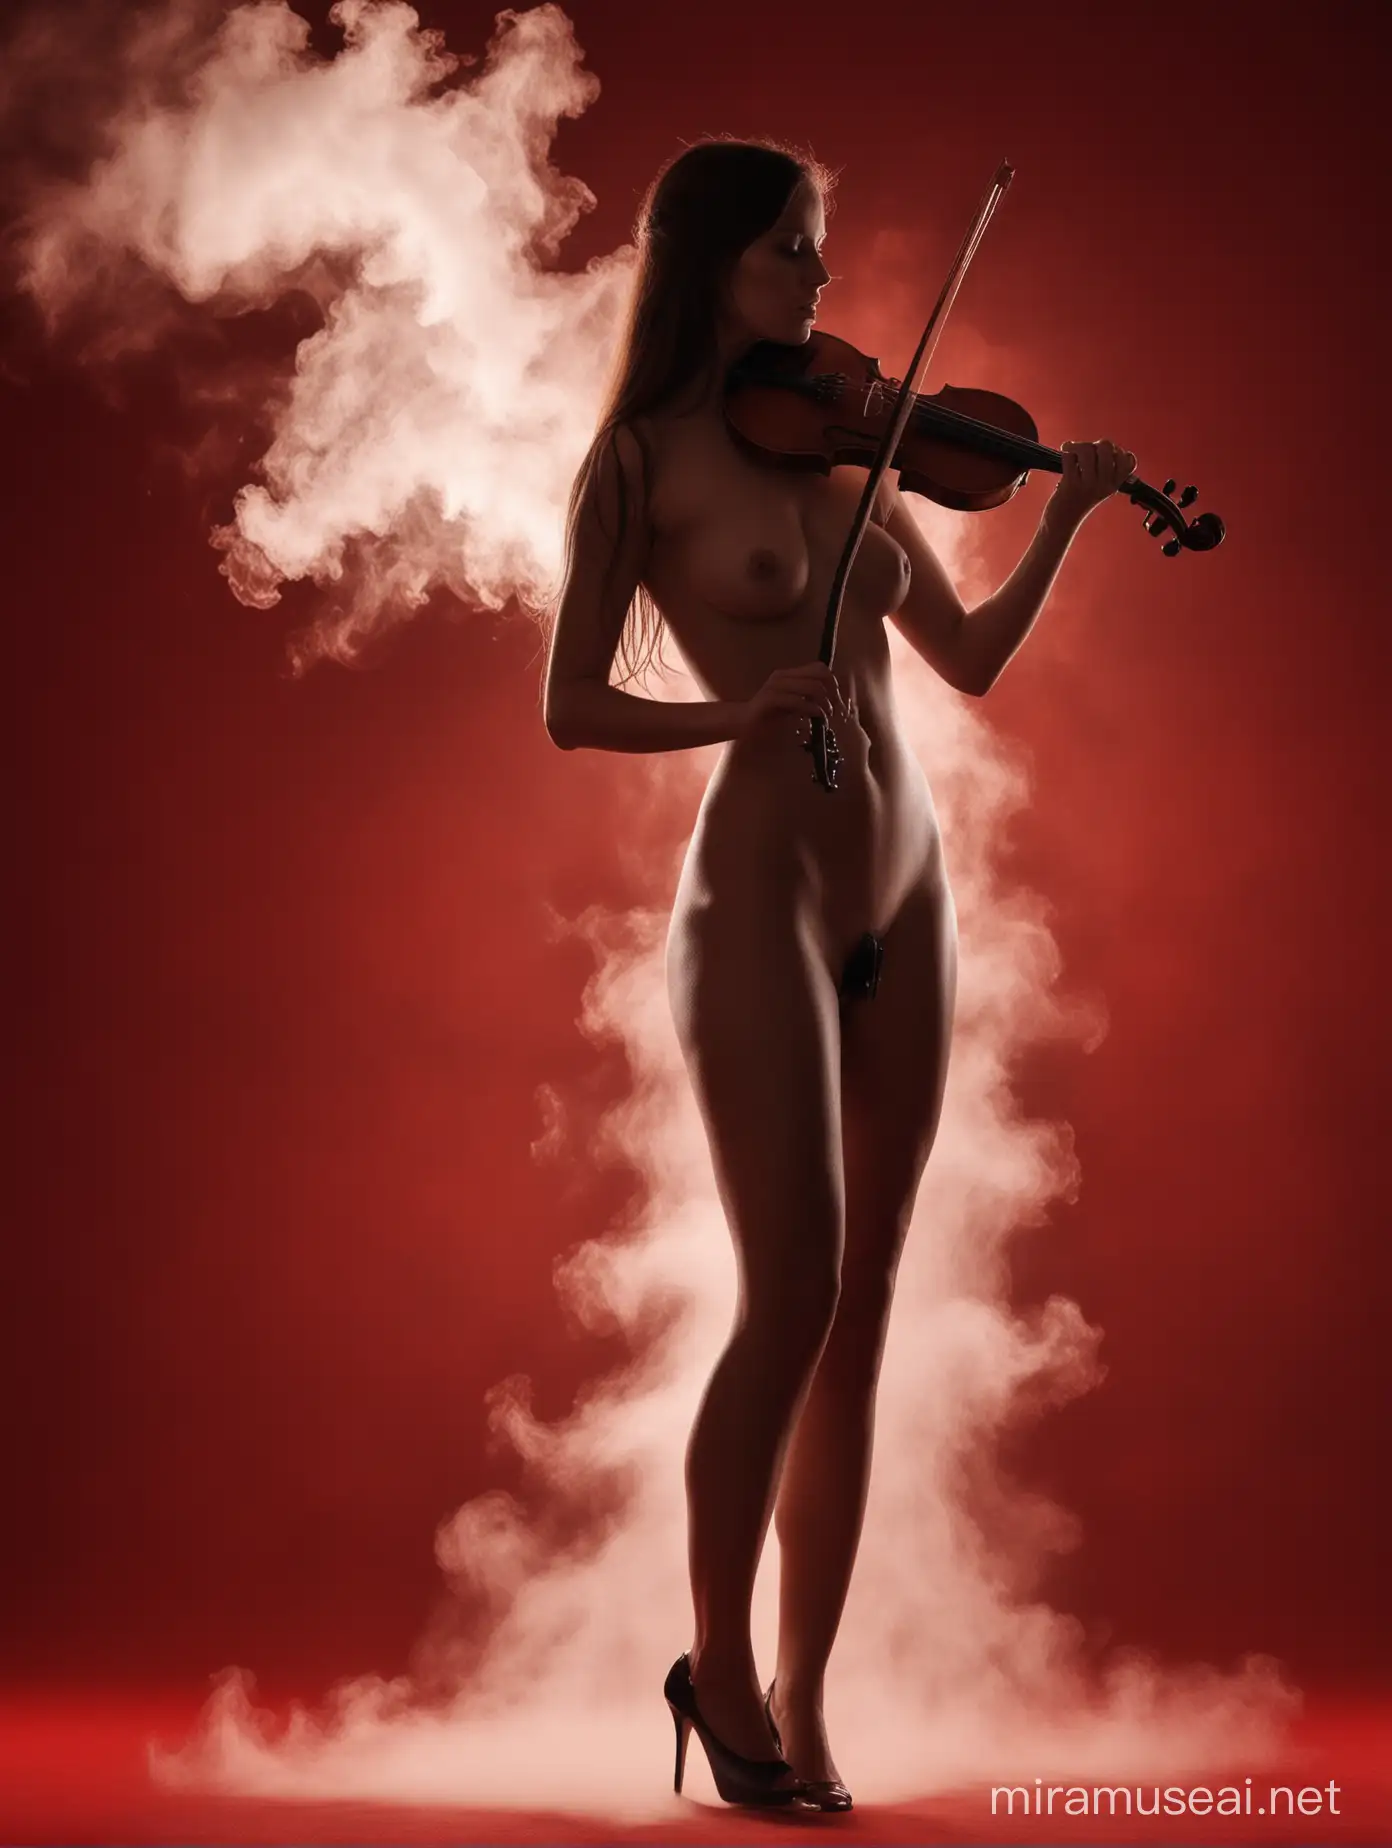 dark silhouette of nude attractive woman playing the violin on dark red backround. Around shape woman is white steam.